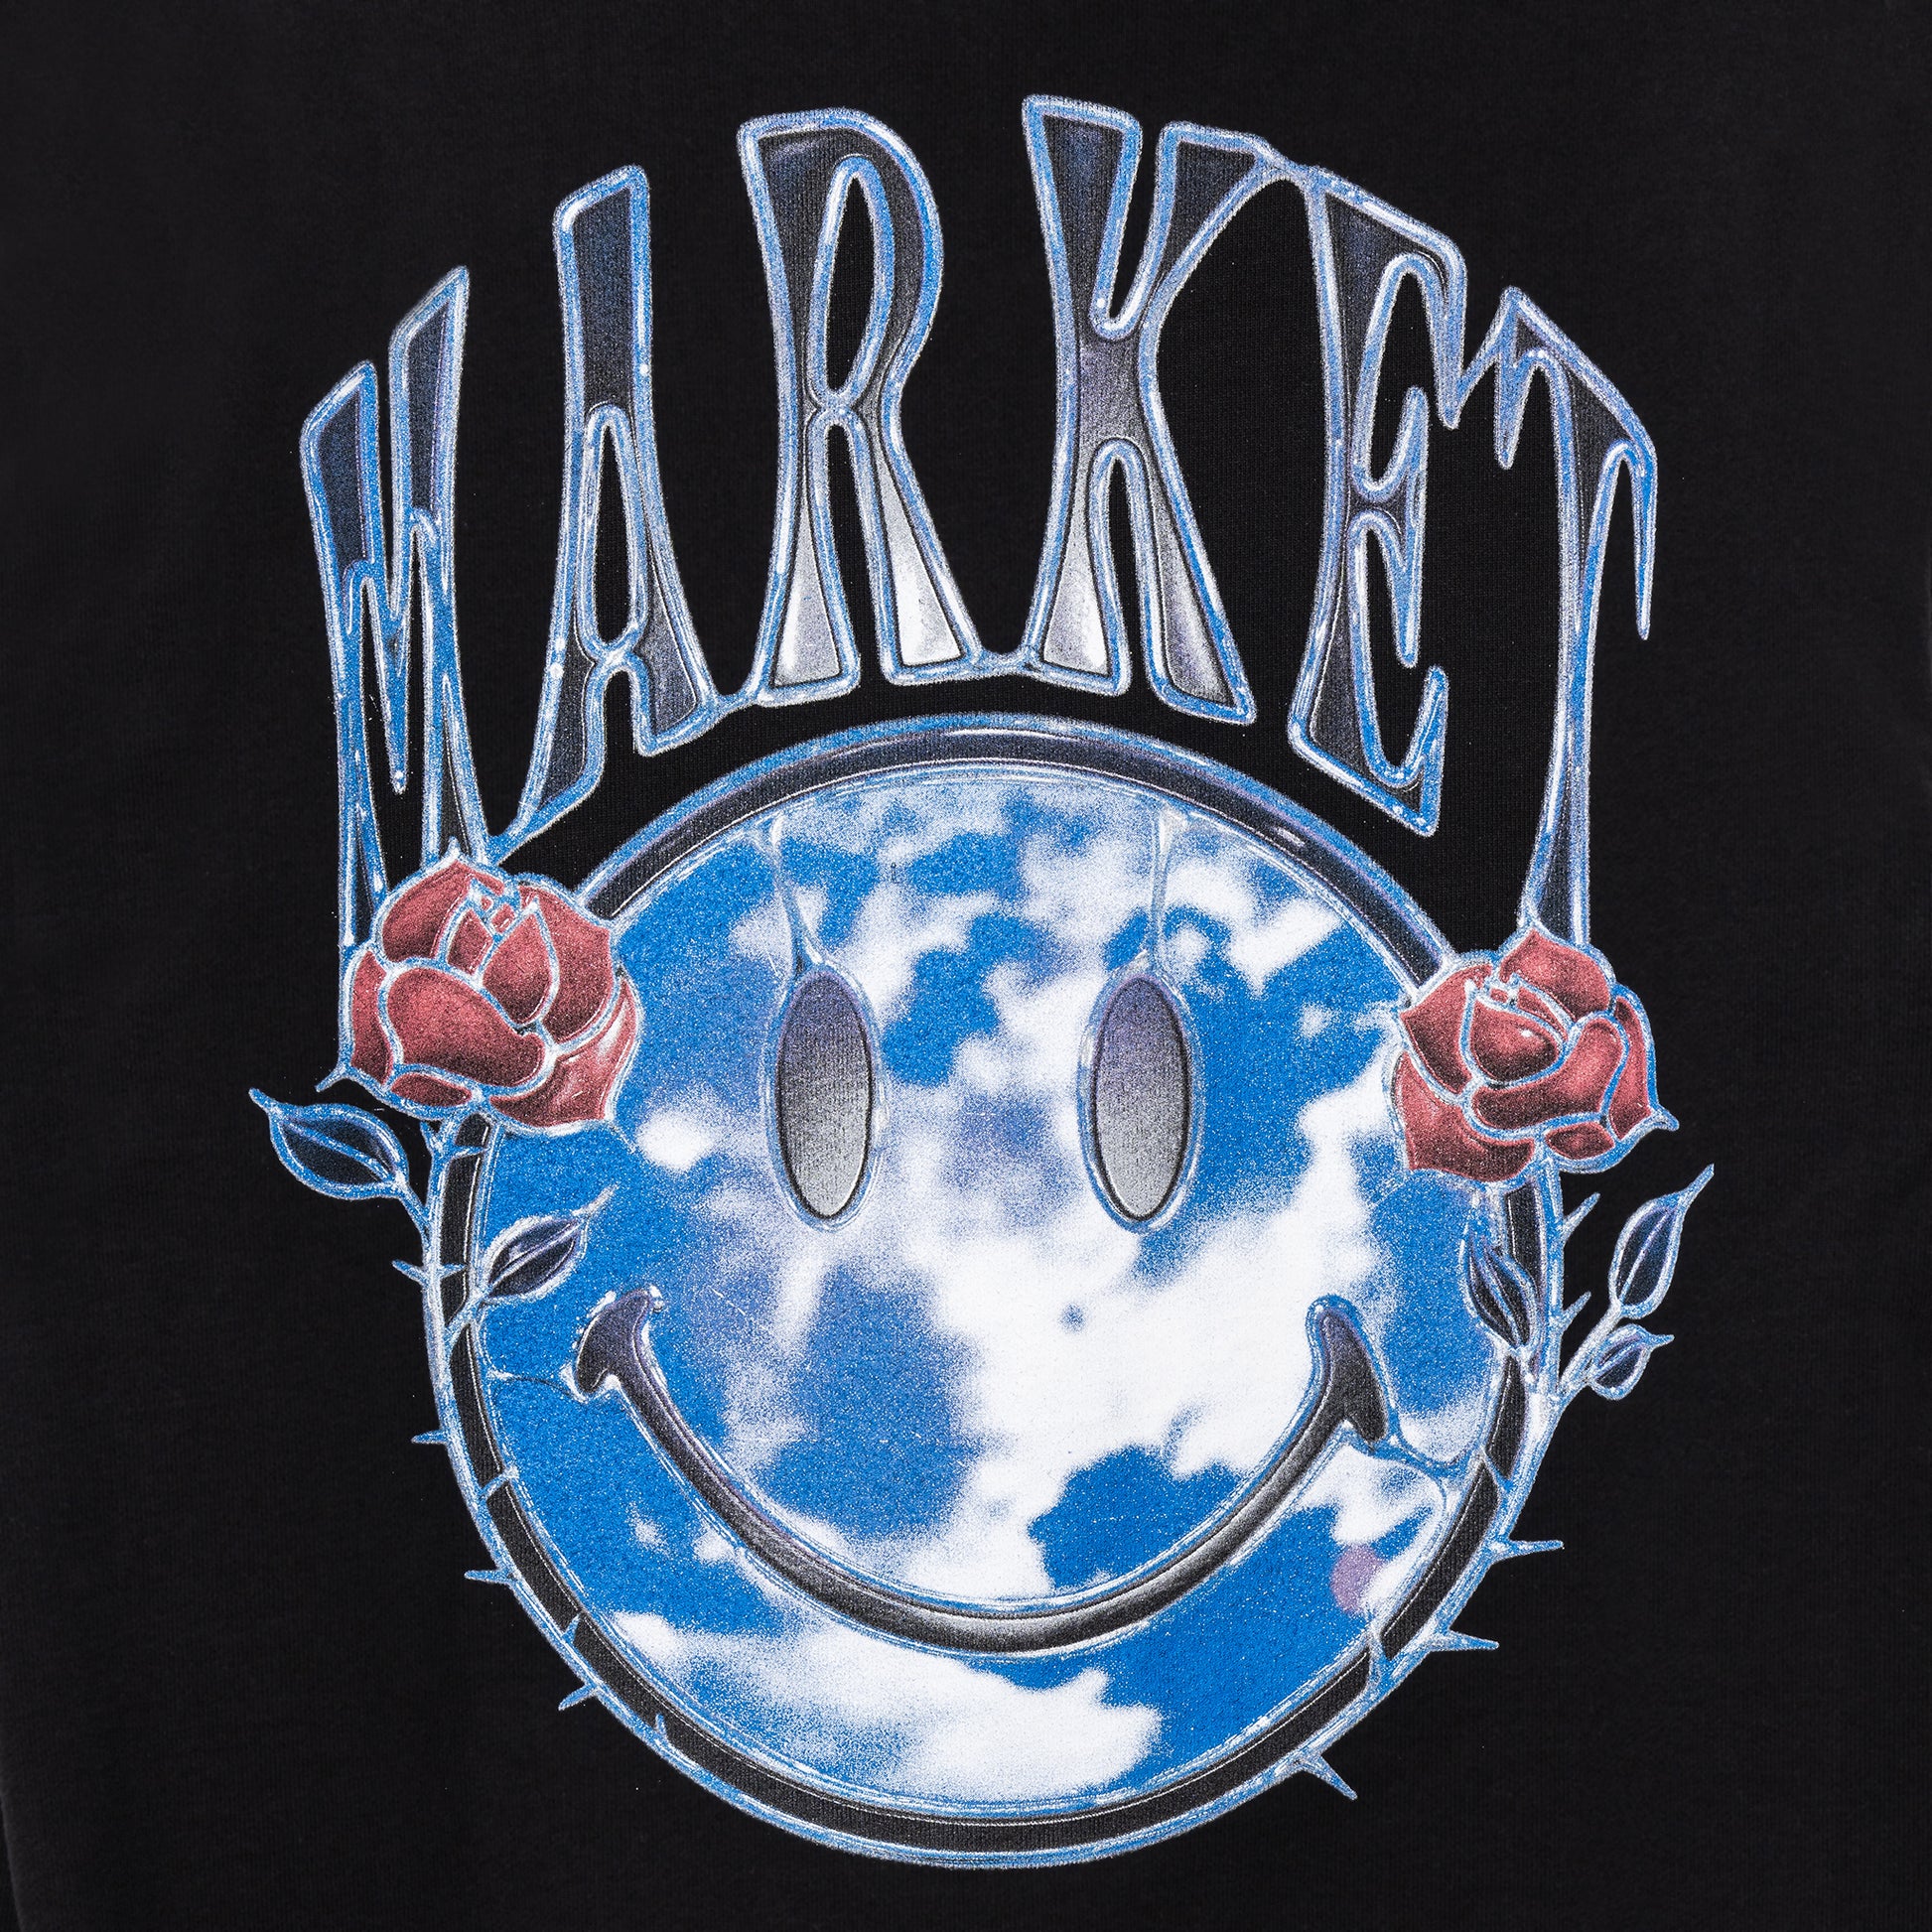 MARKET clothing brand SMILEY REFLECT HOODIE. Find more graphic tees, hats and more at MarketStudios.com. Formally Chinatown Market.